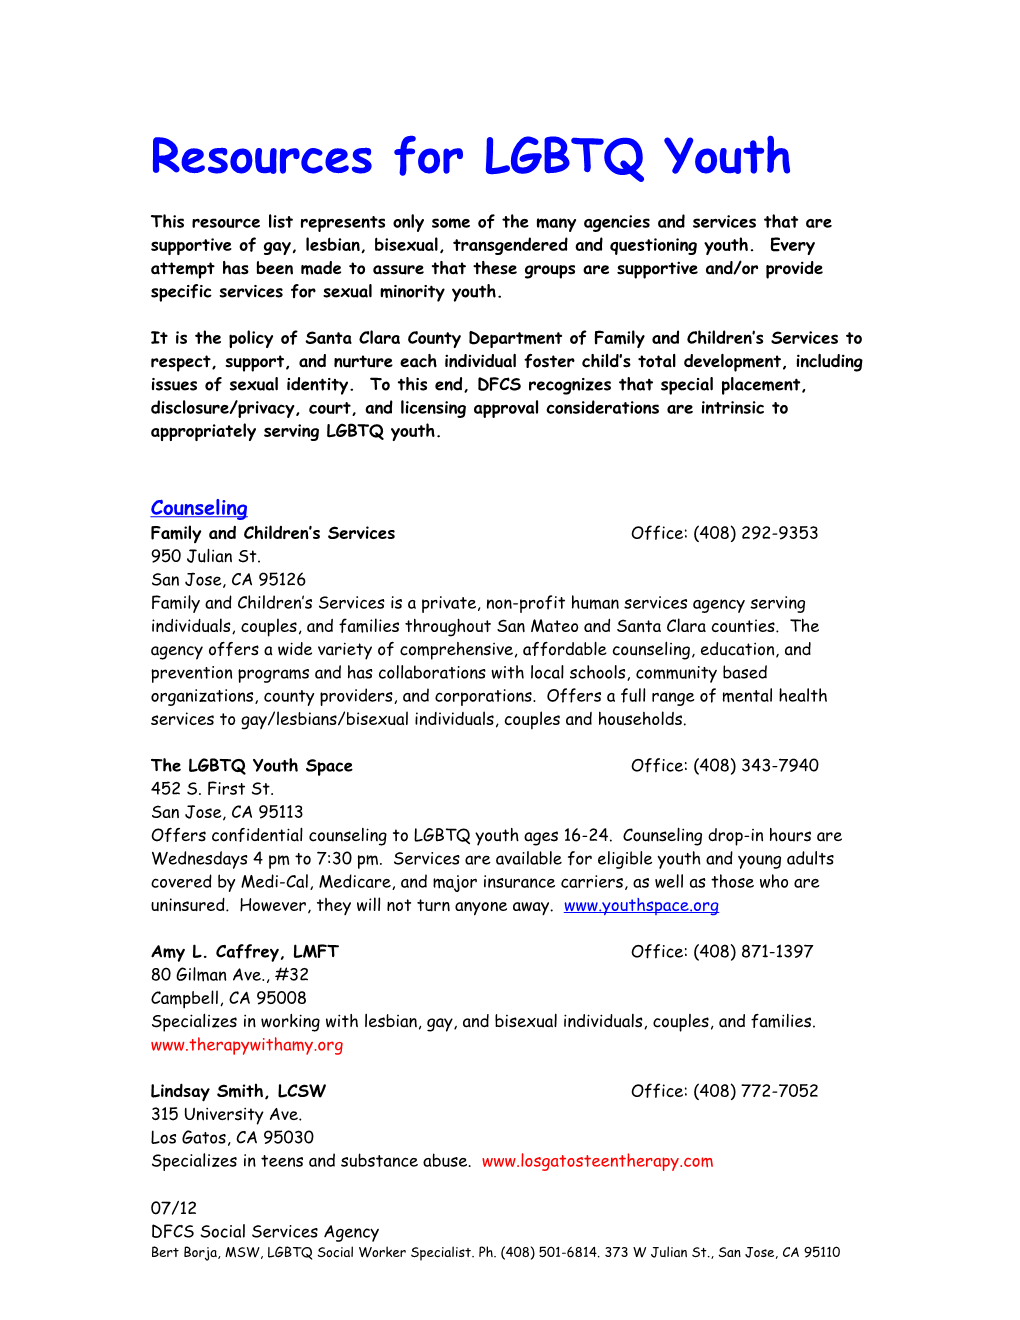 Resources for LGBTQ Youth